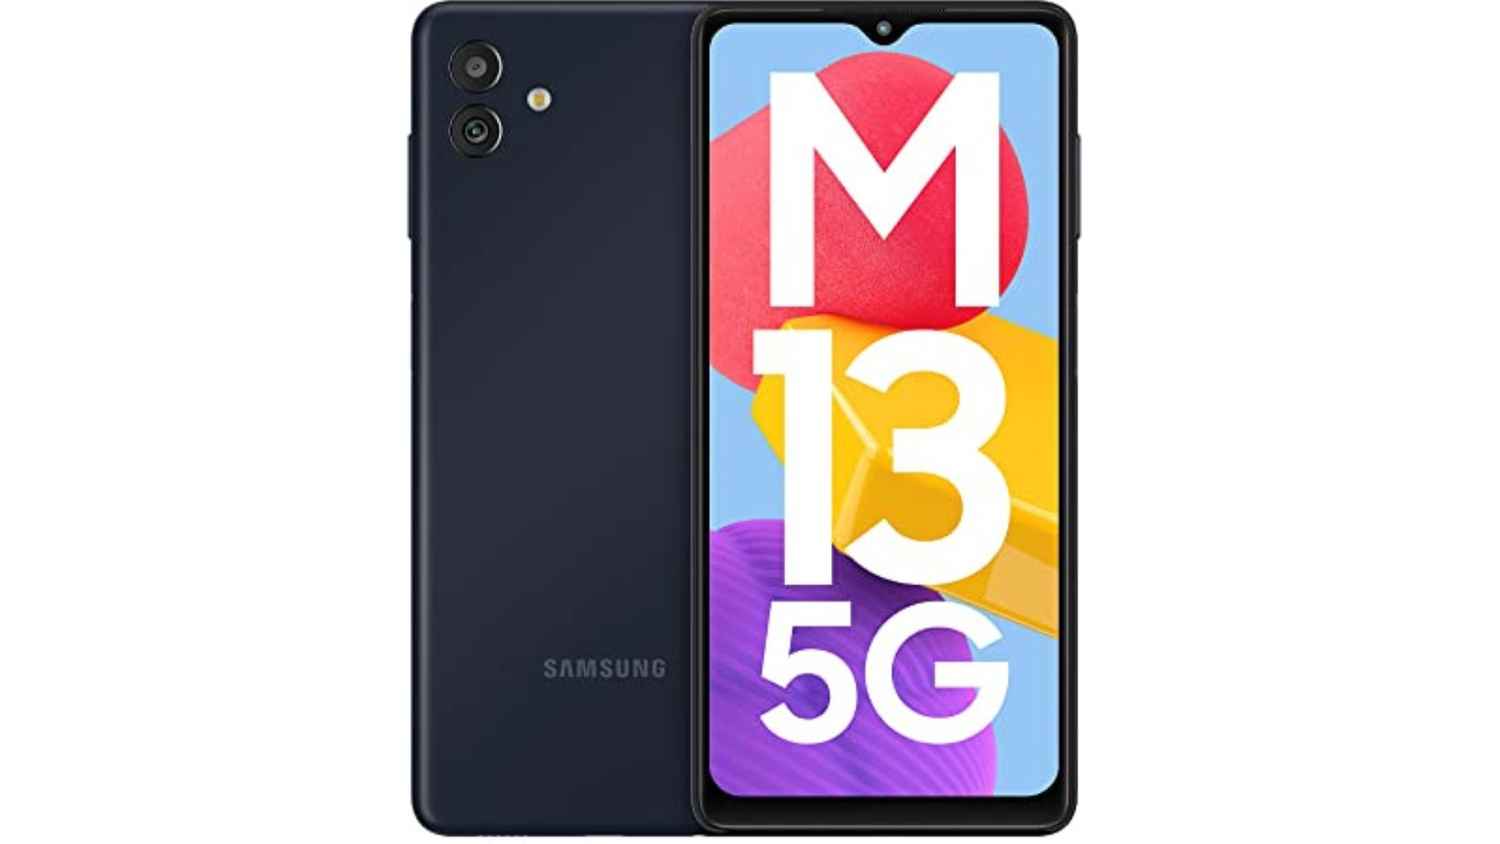 Samsung Galaxy M13 available with attractive deals: Includes exchange offer, bank offers and more